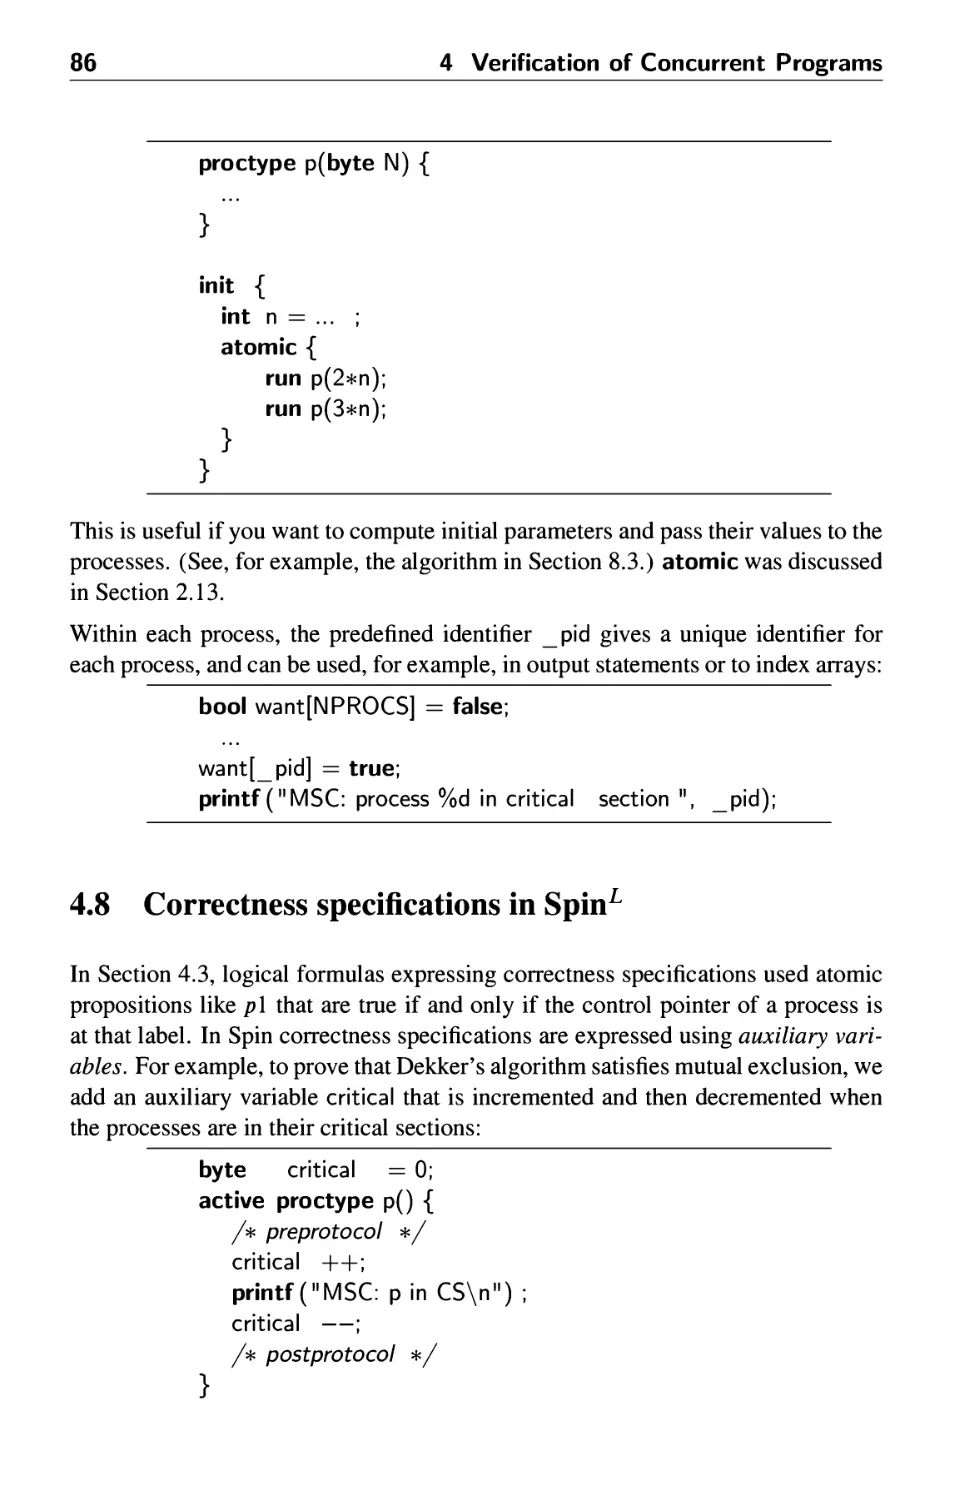 4.8 Correctness specifications in Spin